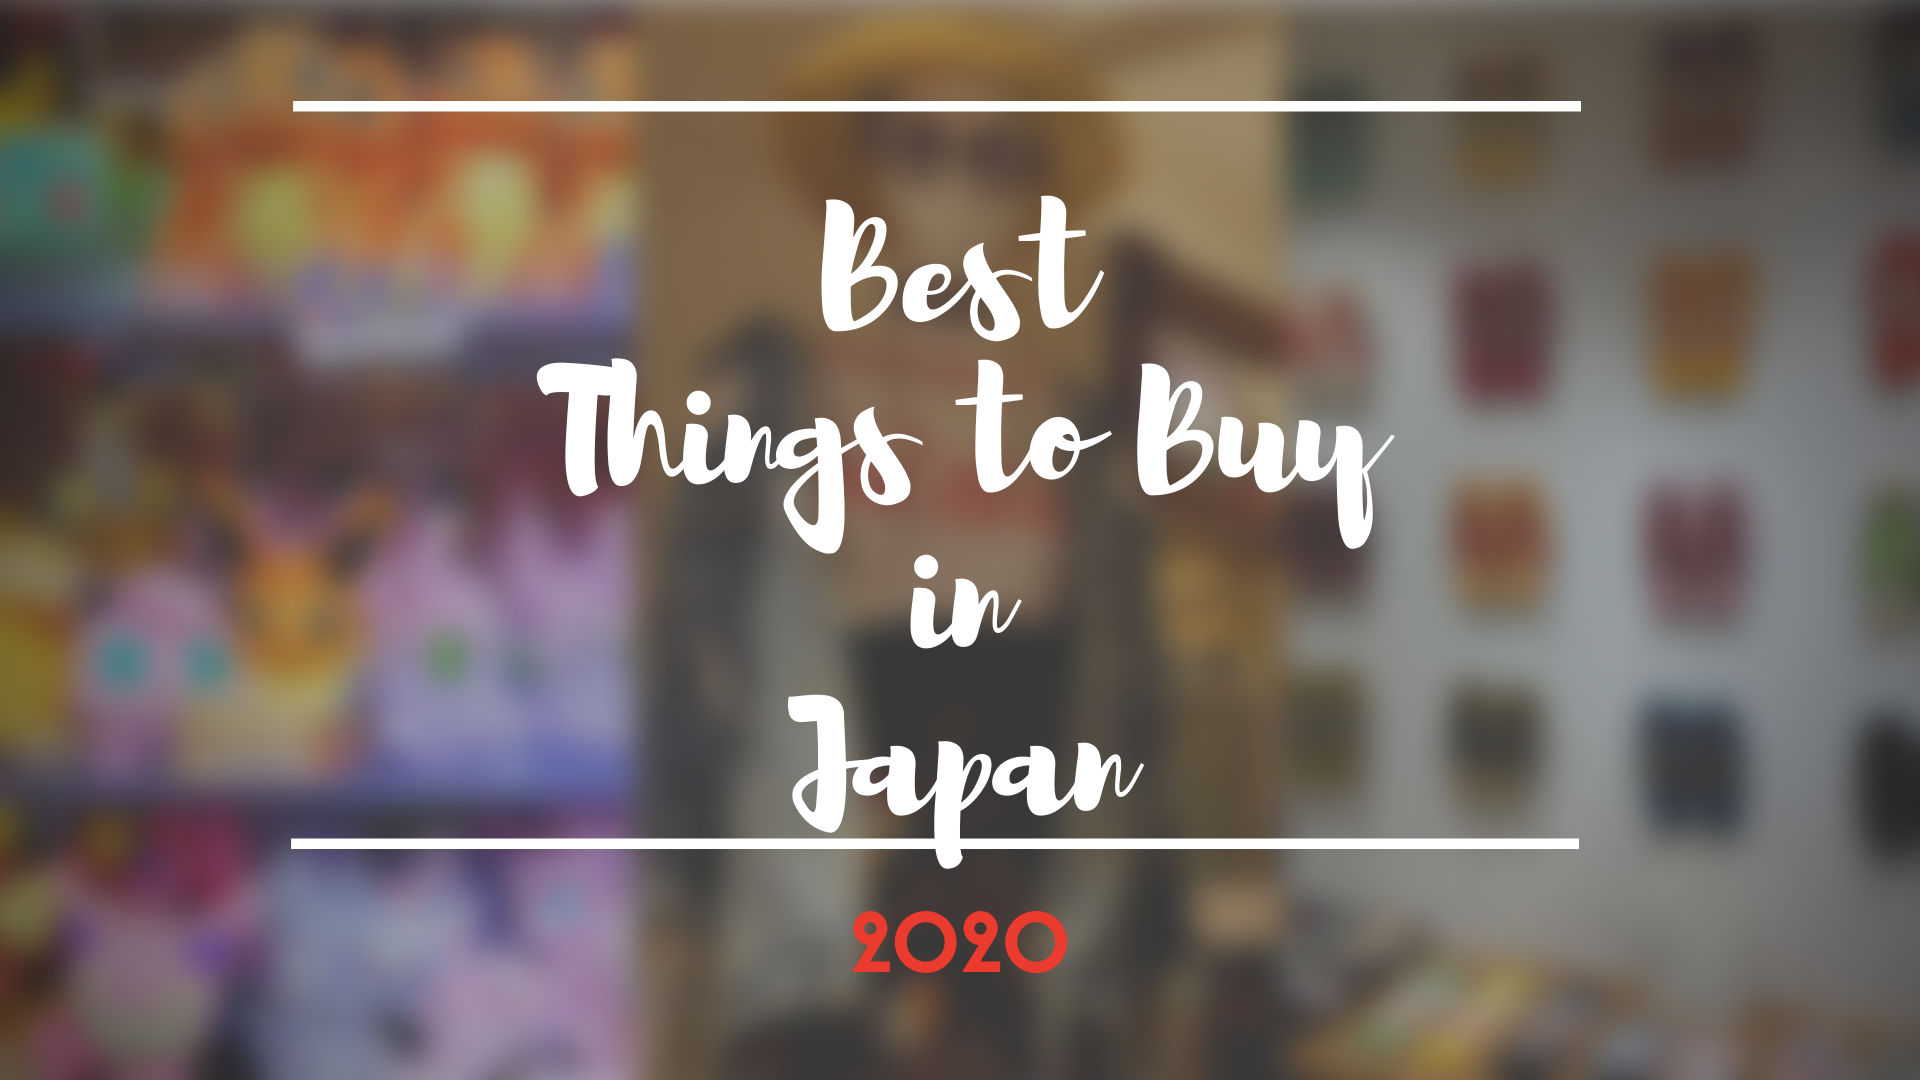 What to Buy in Japan 2020